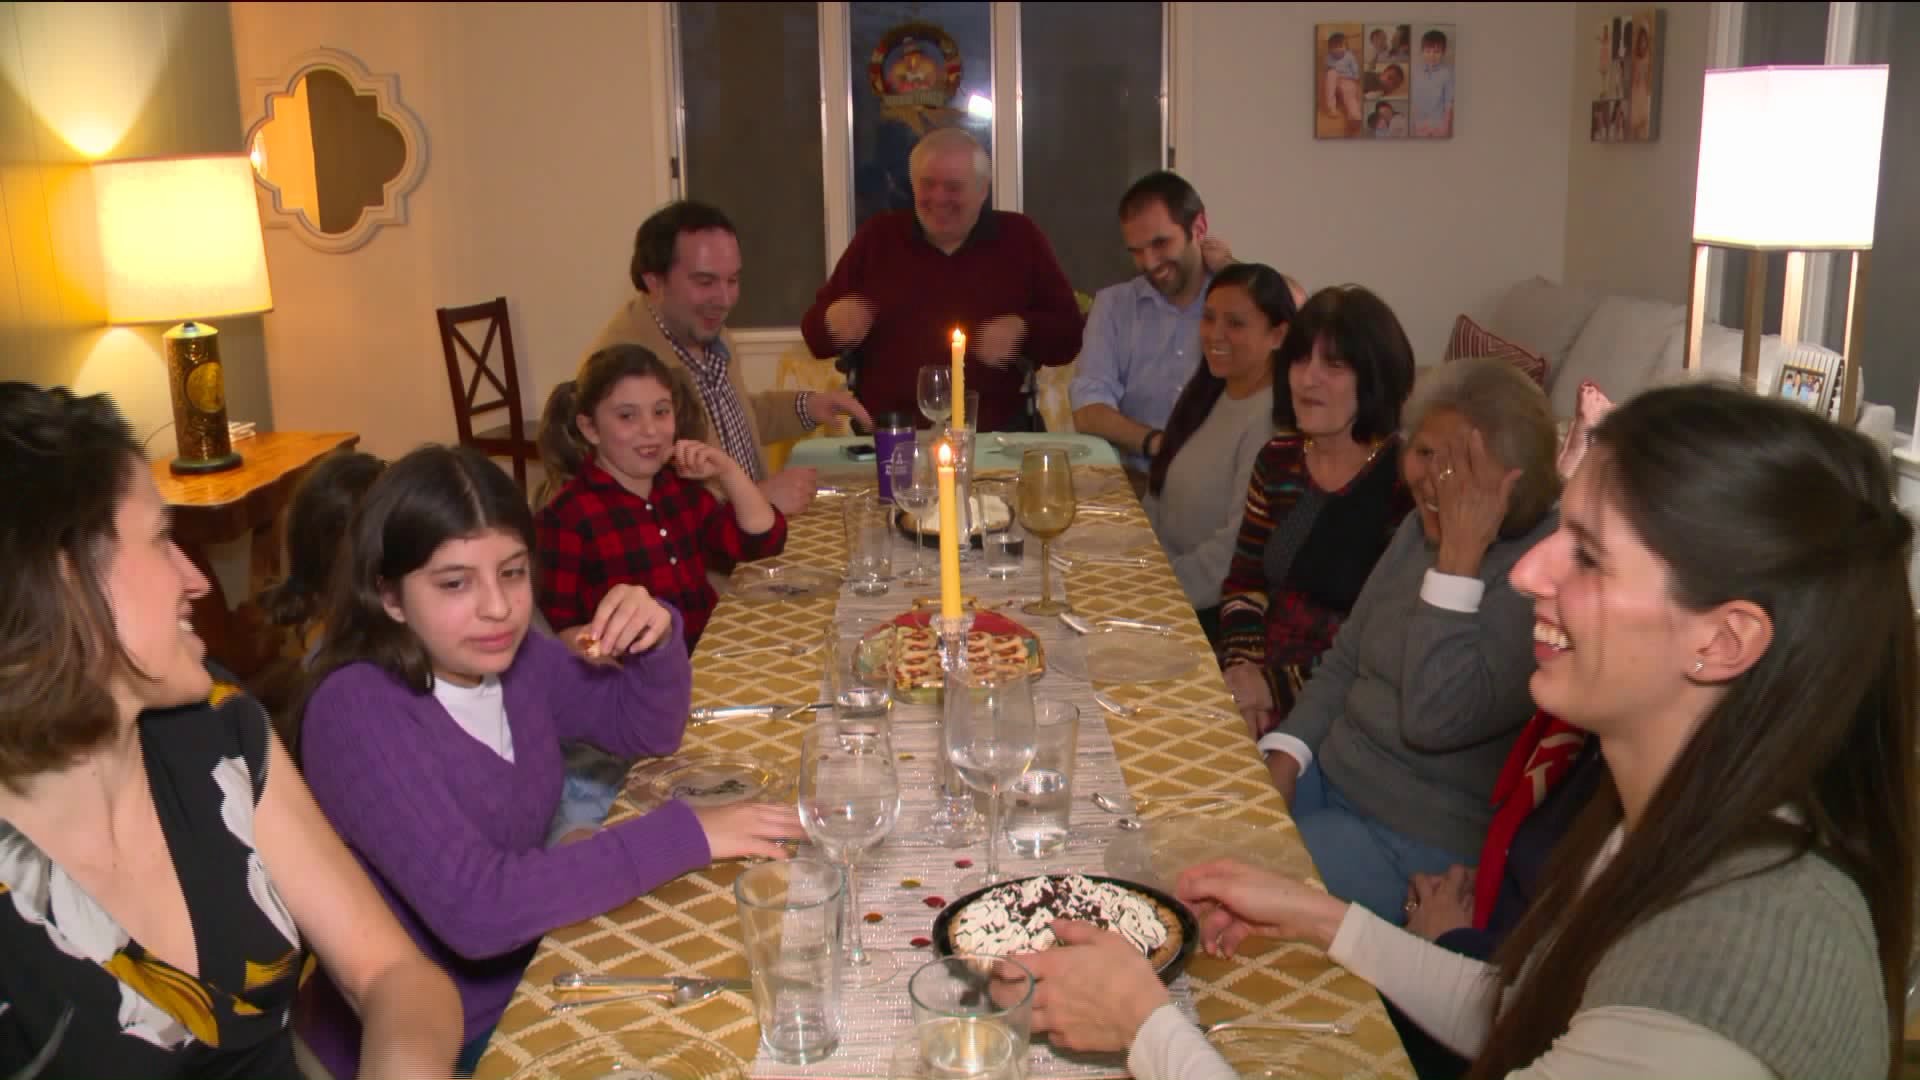 Lifelong pen pals unite for Thanksgiving holiday